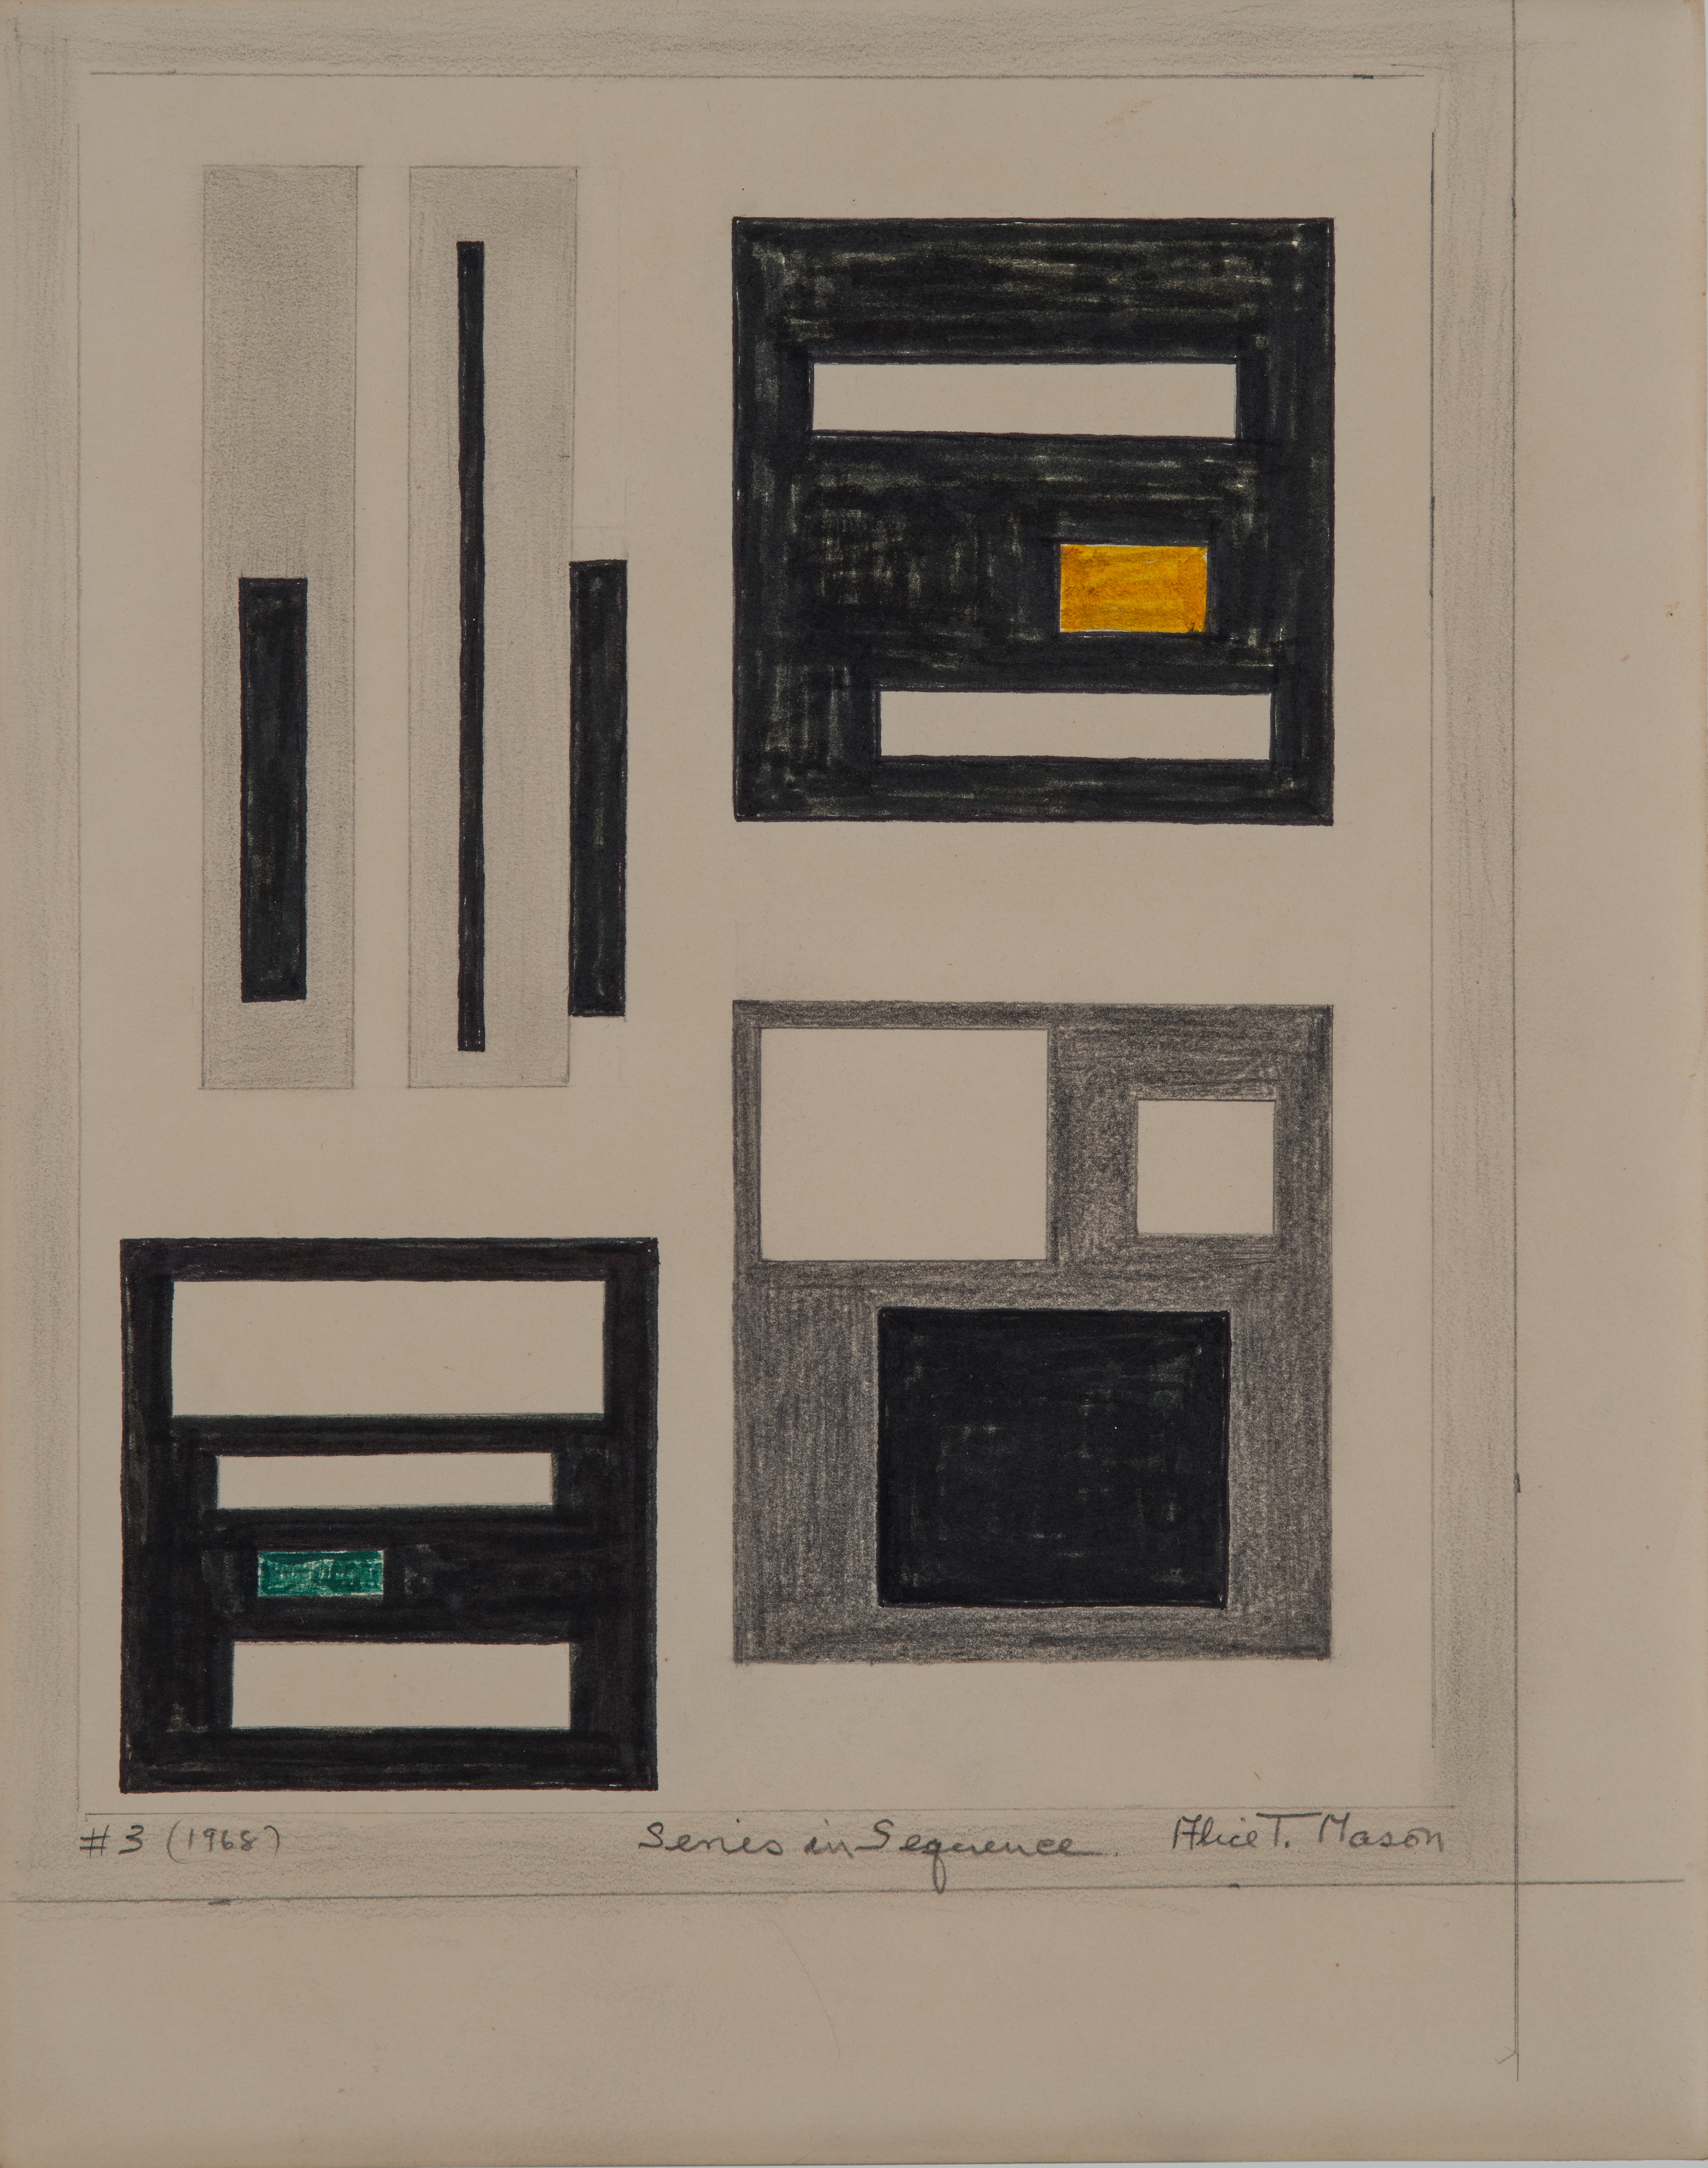 Abstract ink and crayon work on paper, comprised of white, grey, and black squares and rectangles in all four corners. There is one small singular orange rectangle in the upper right of the composition.